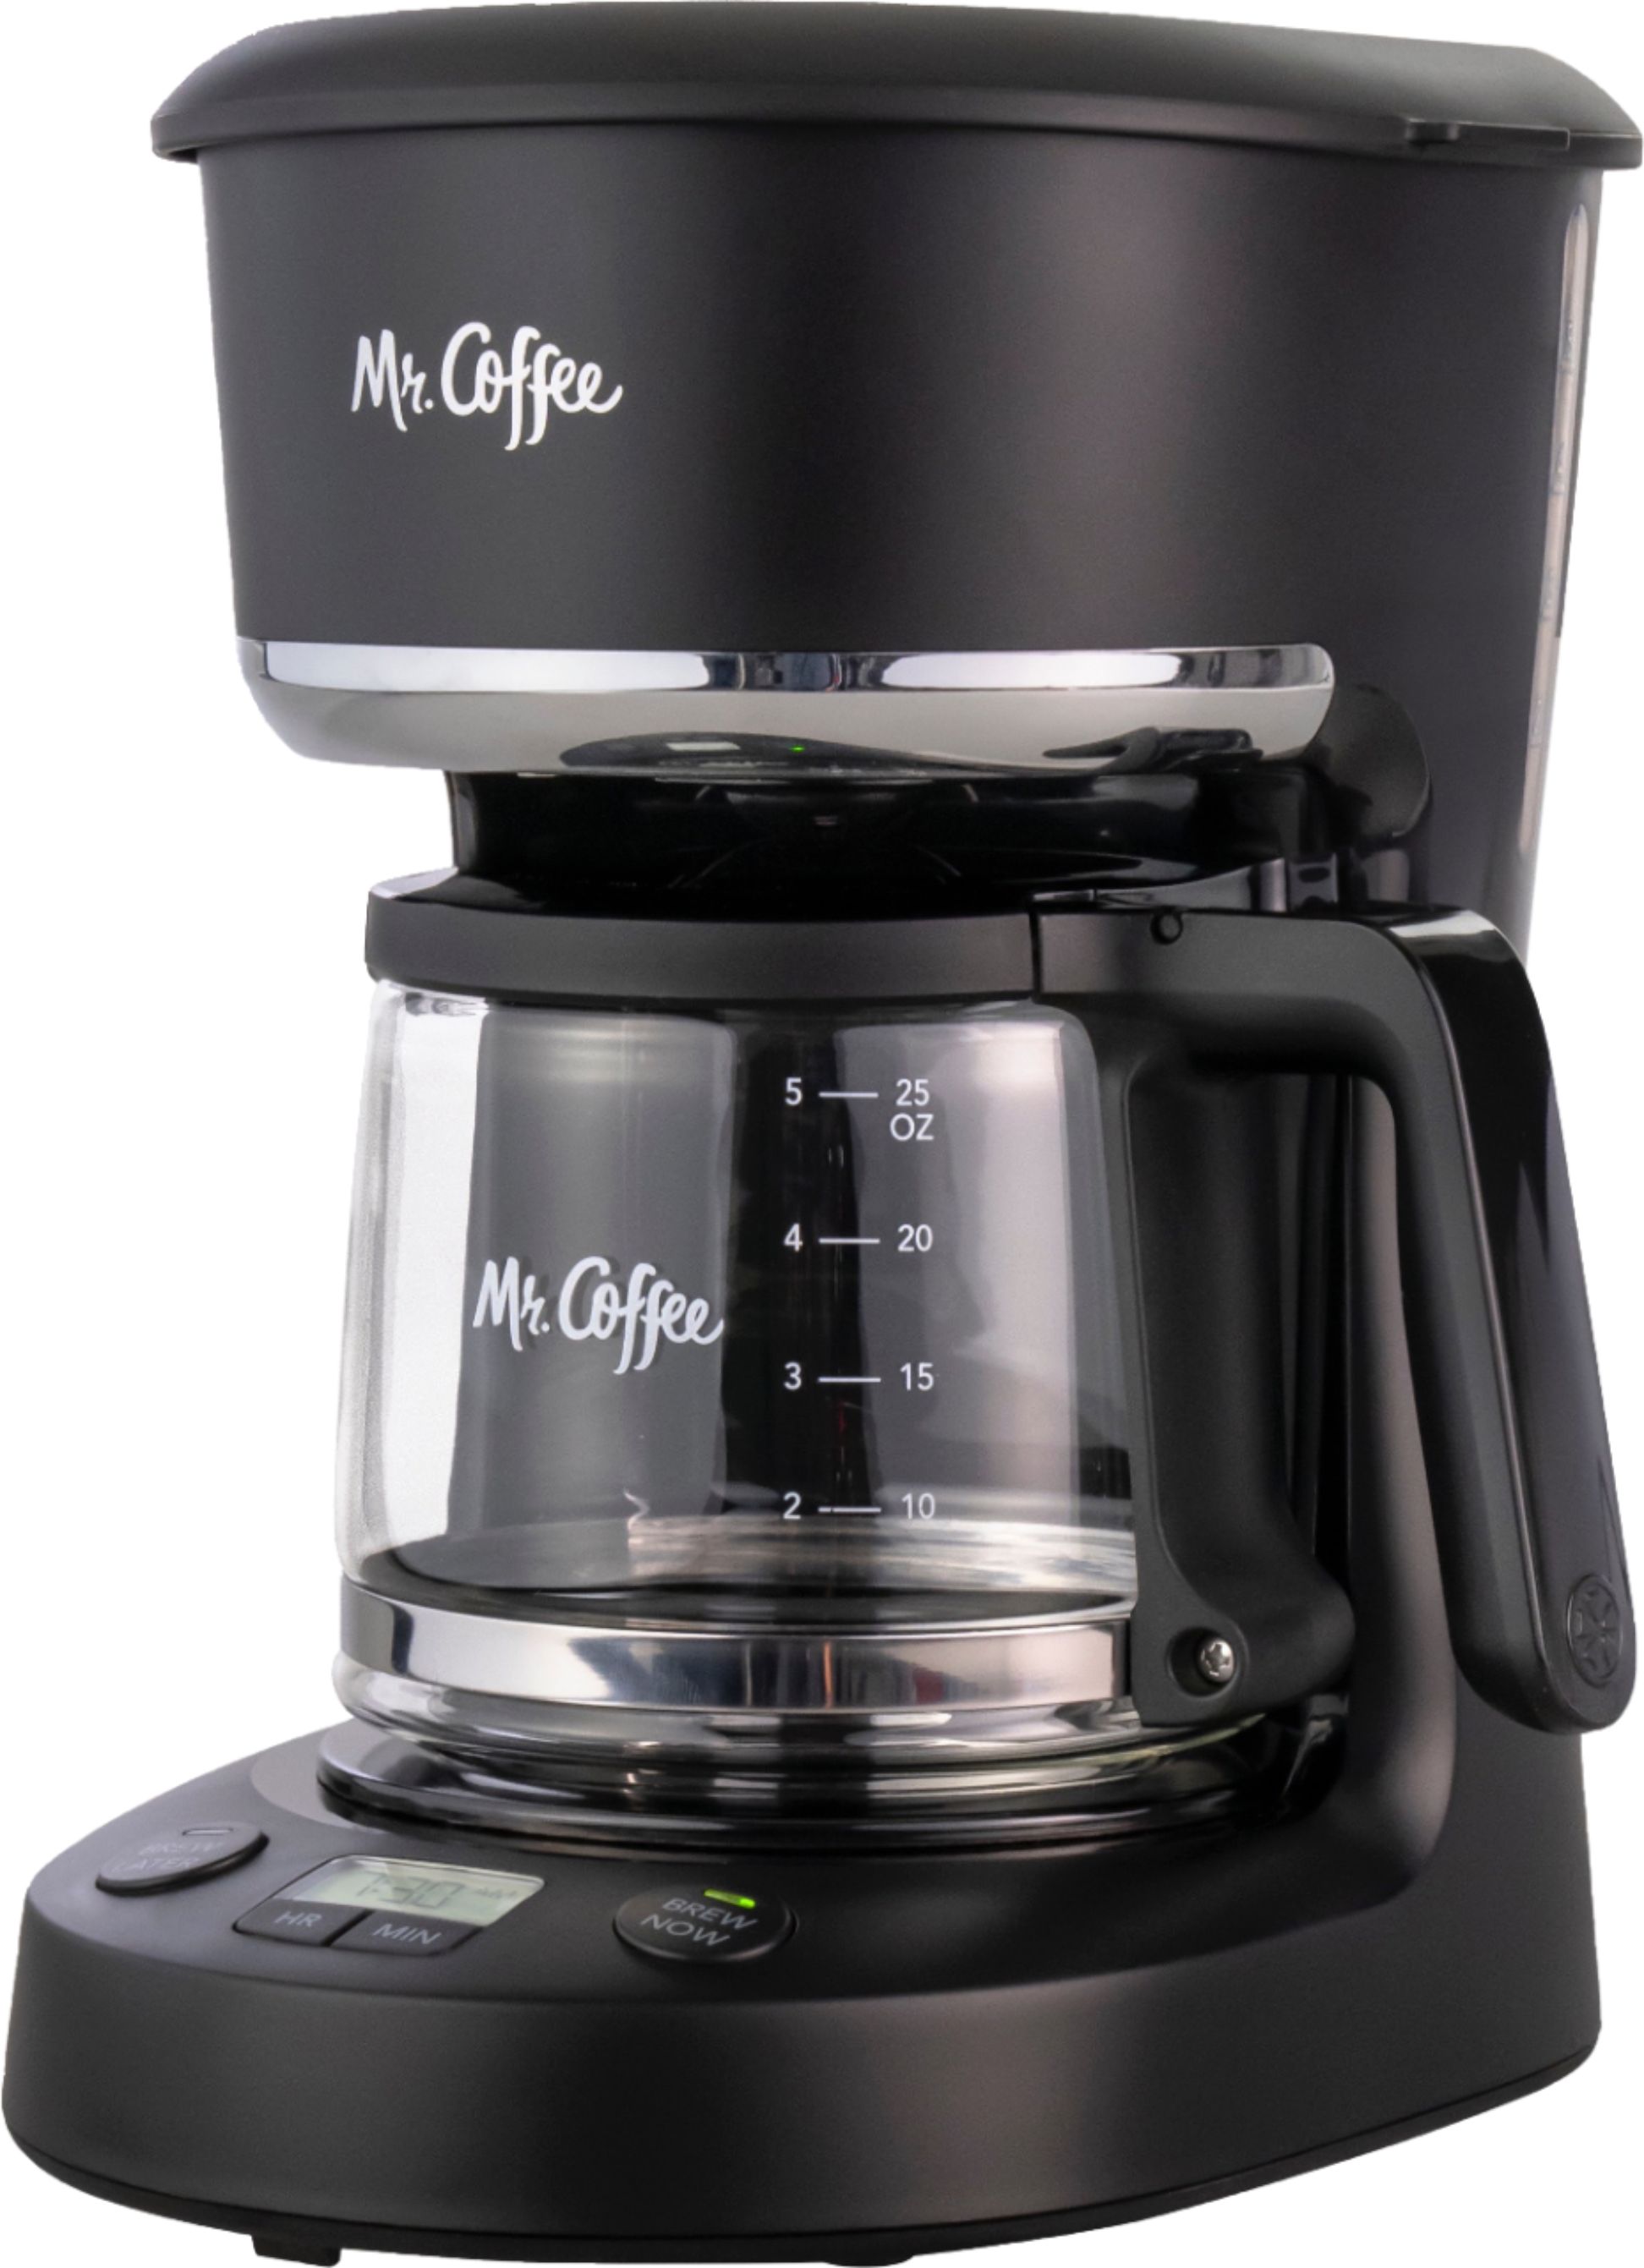 Mainstays Black 5-Cup Drip Coffee Maker, New 